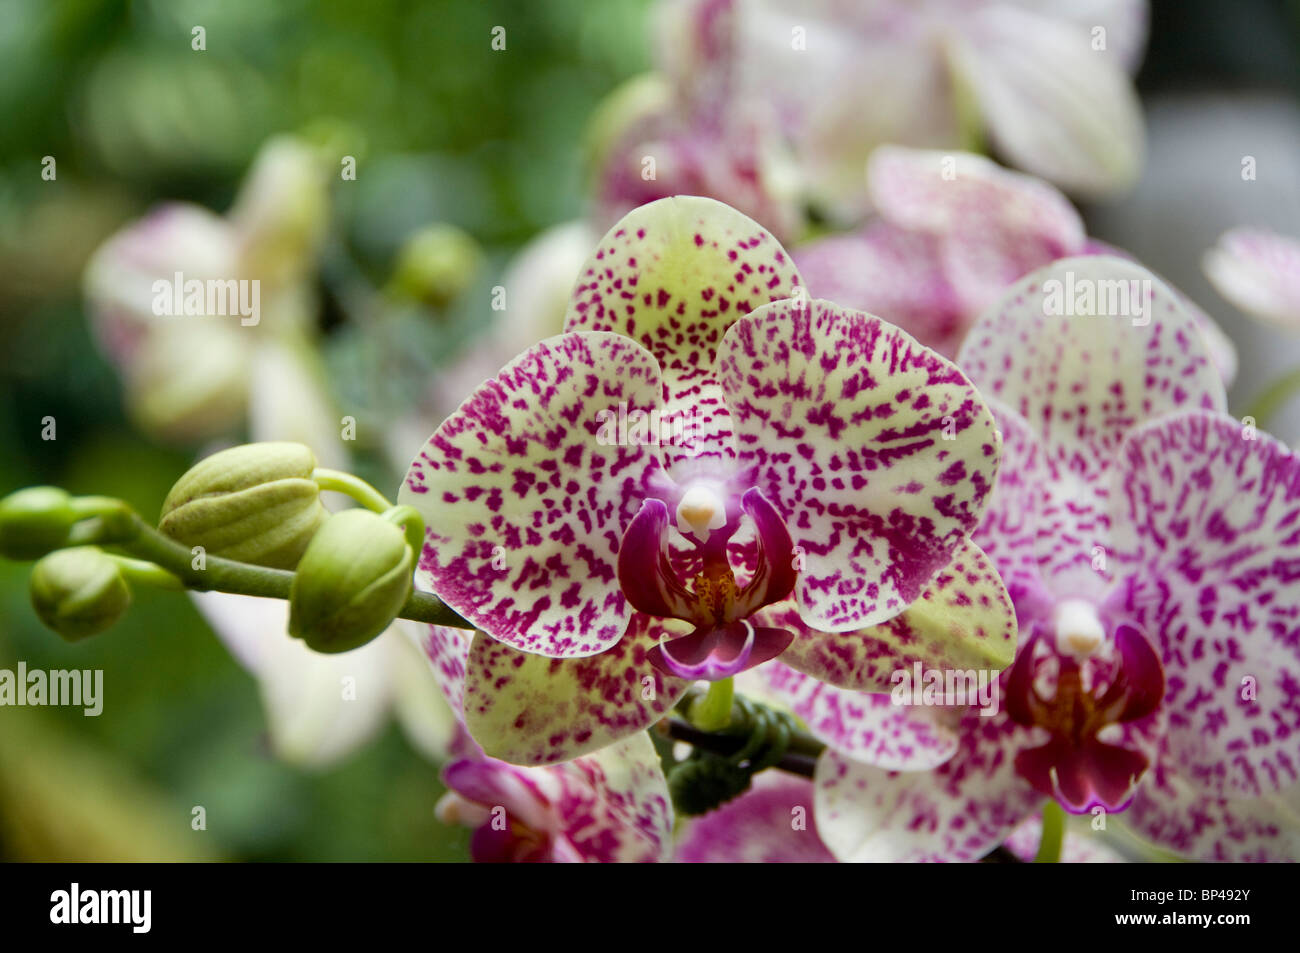 Singapore Sanskrit For Lion City National Orchid Garden Located